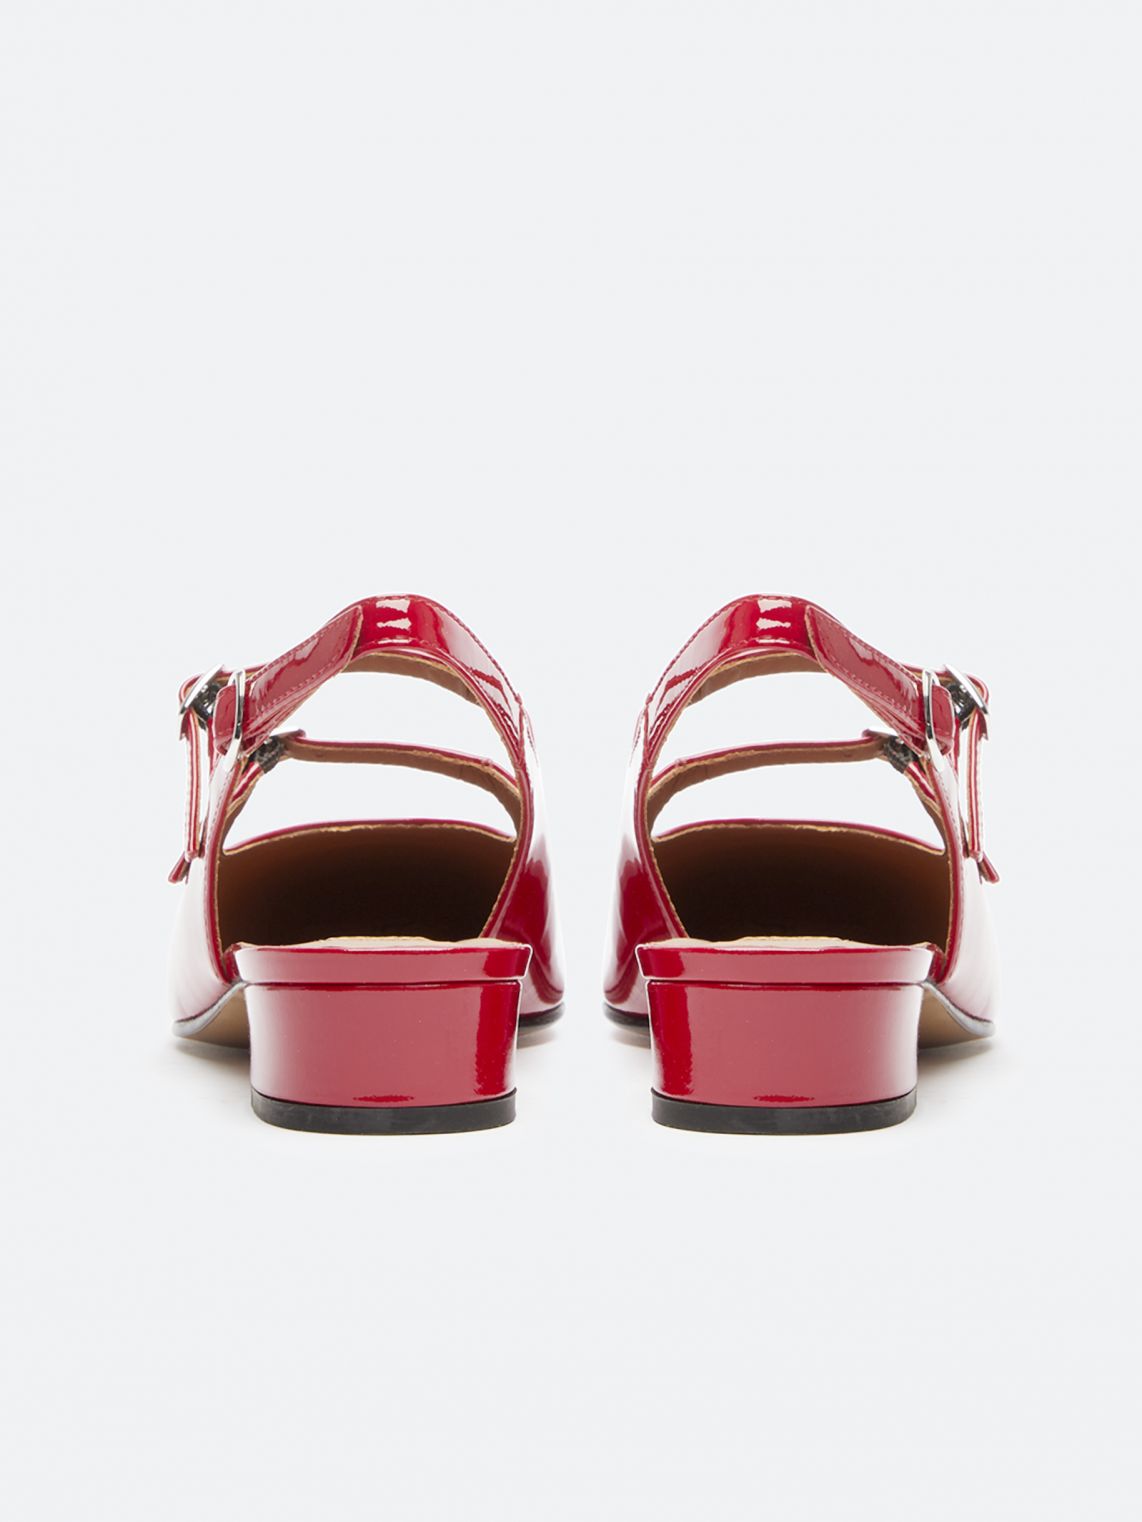 PECHE red patent leather mary janes | Carel Paris Shoes